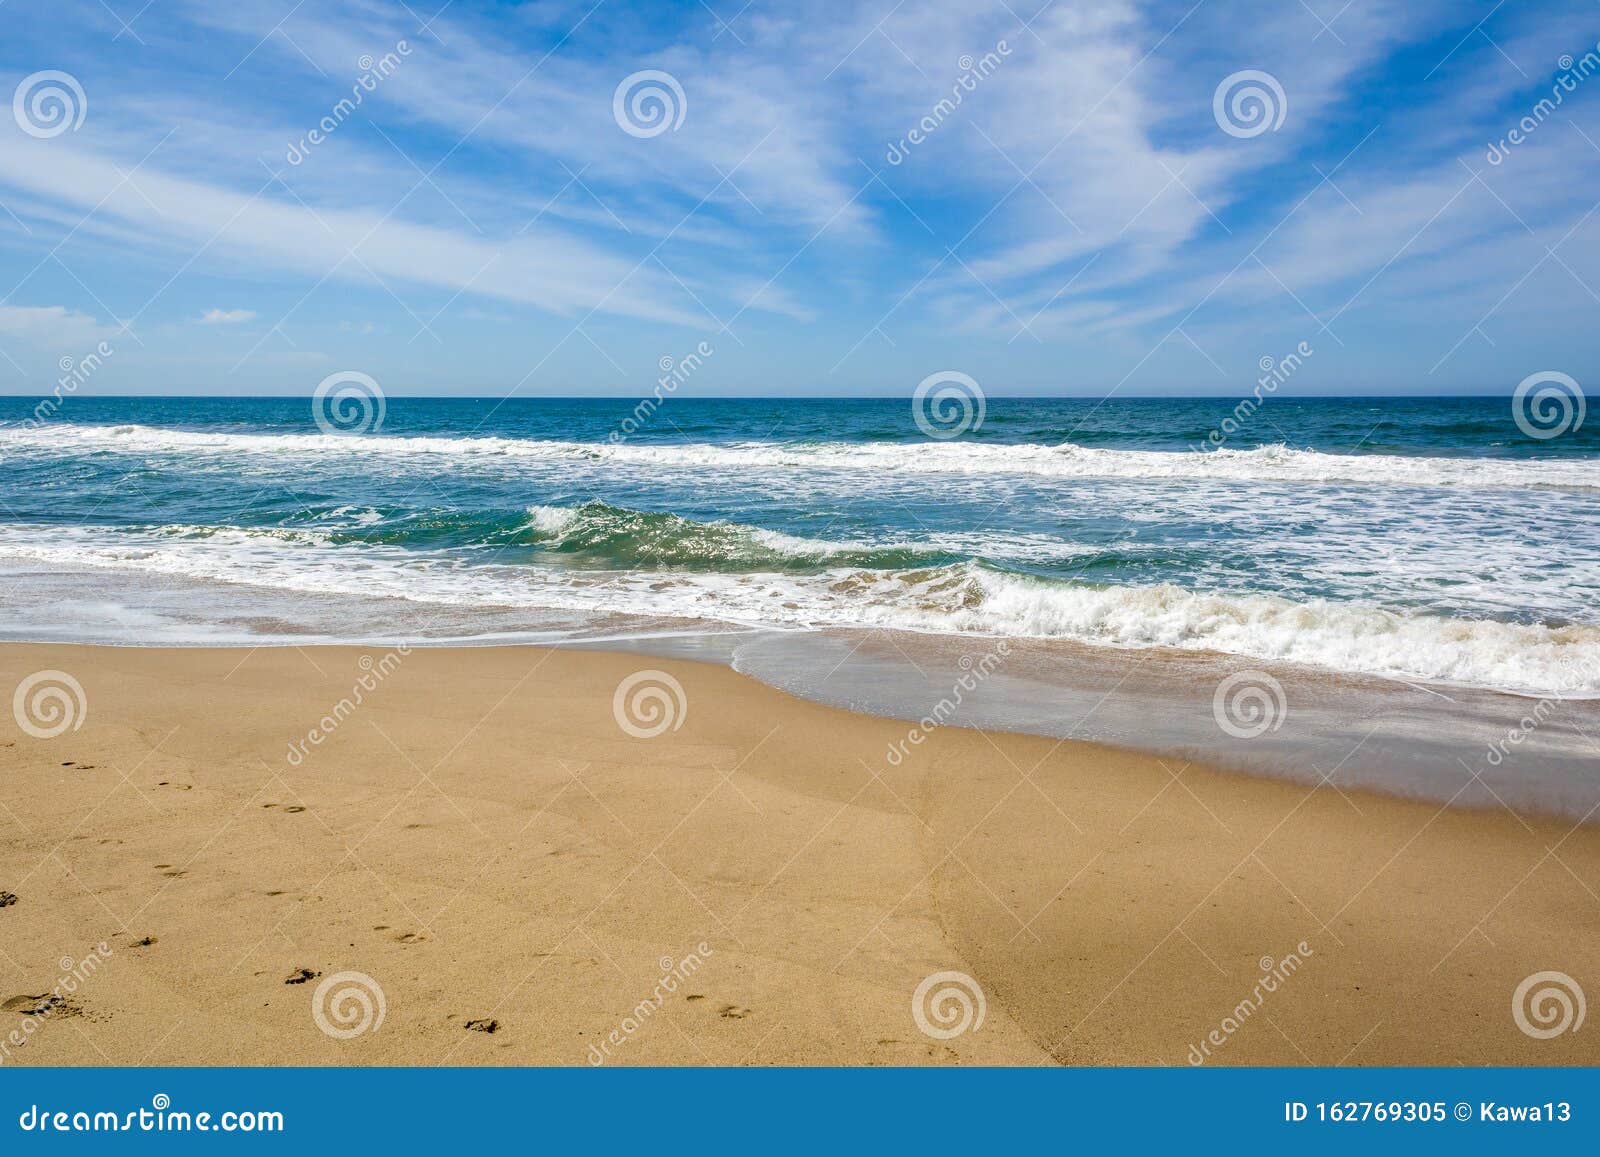 Zuma Beach, One of the Most Popular Beaches in Los Angeles Stock Image